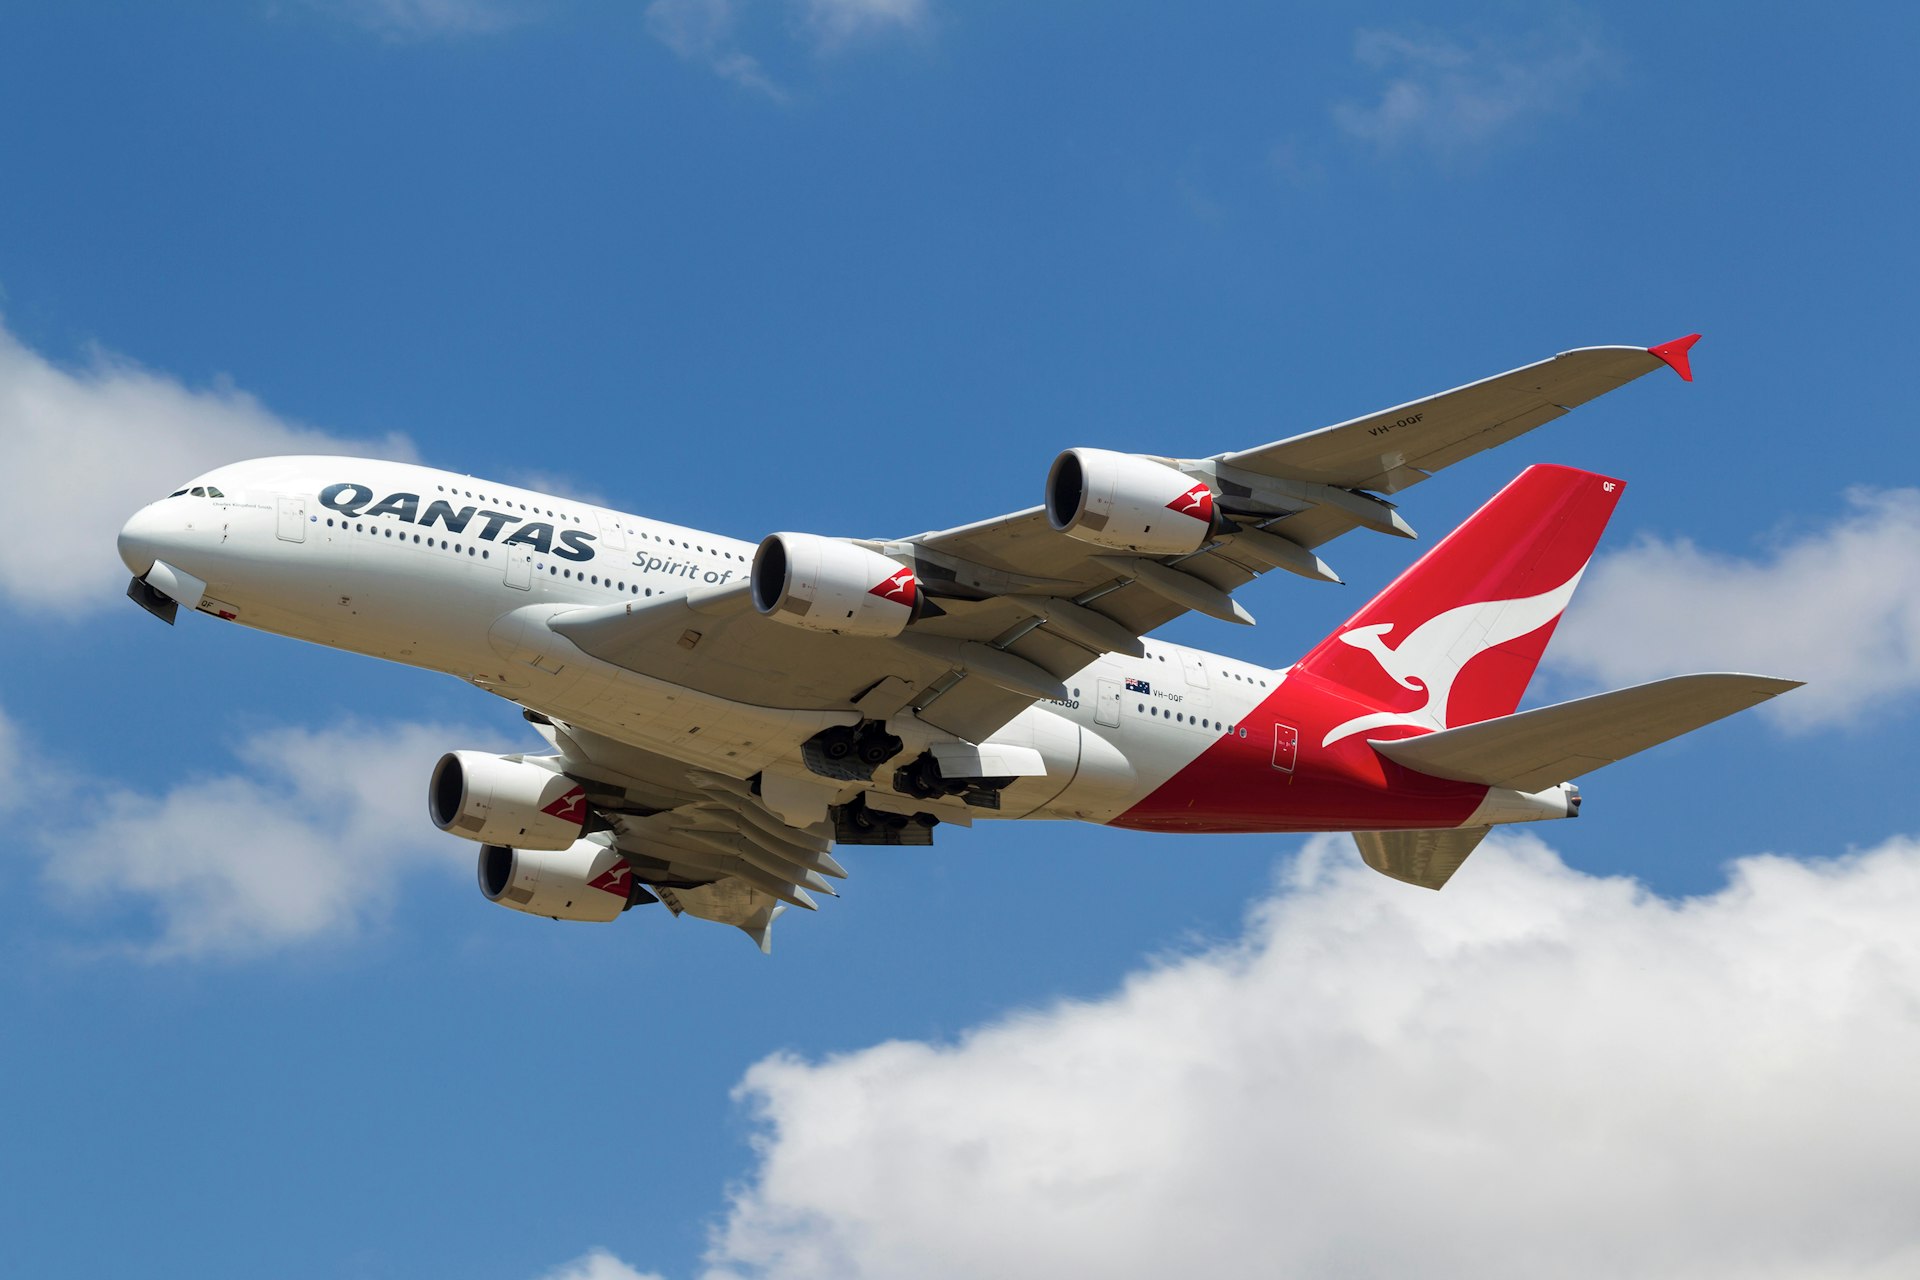 Qantas Airways Airbus A380 takes off from Melbourne International Airport 